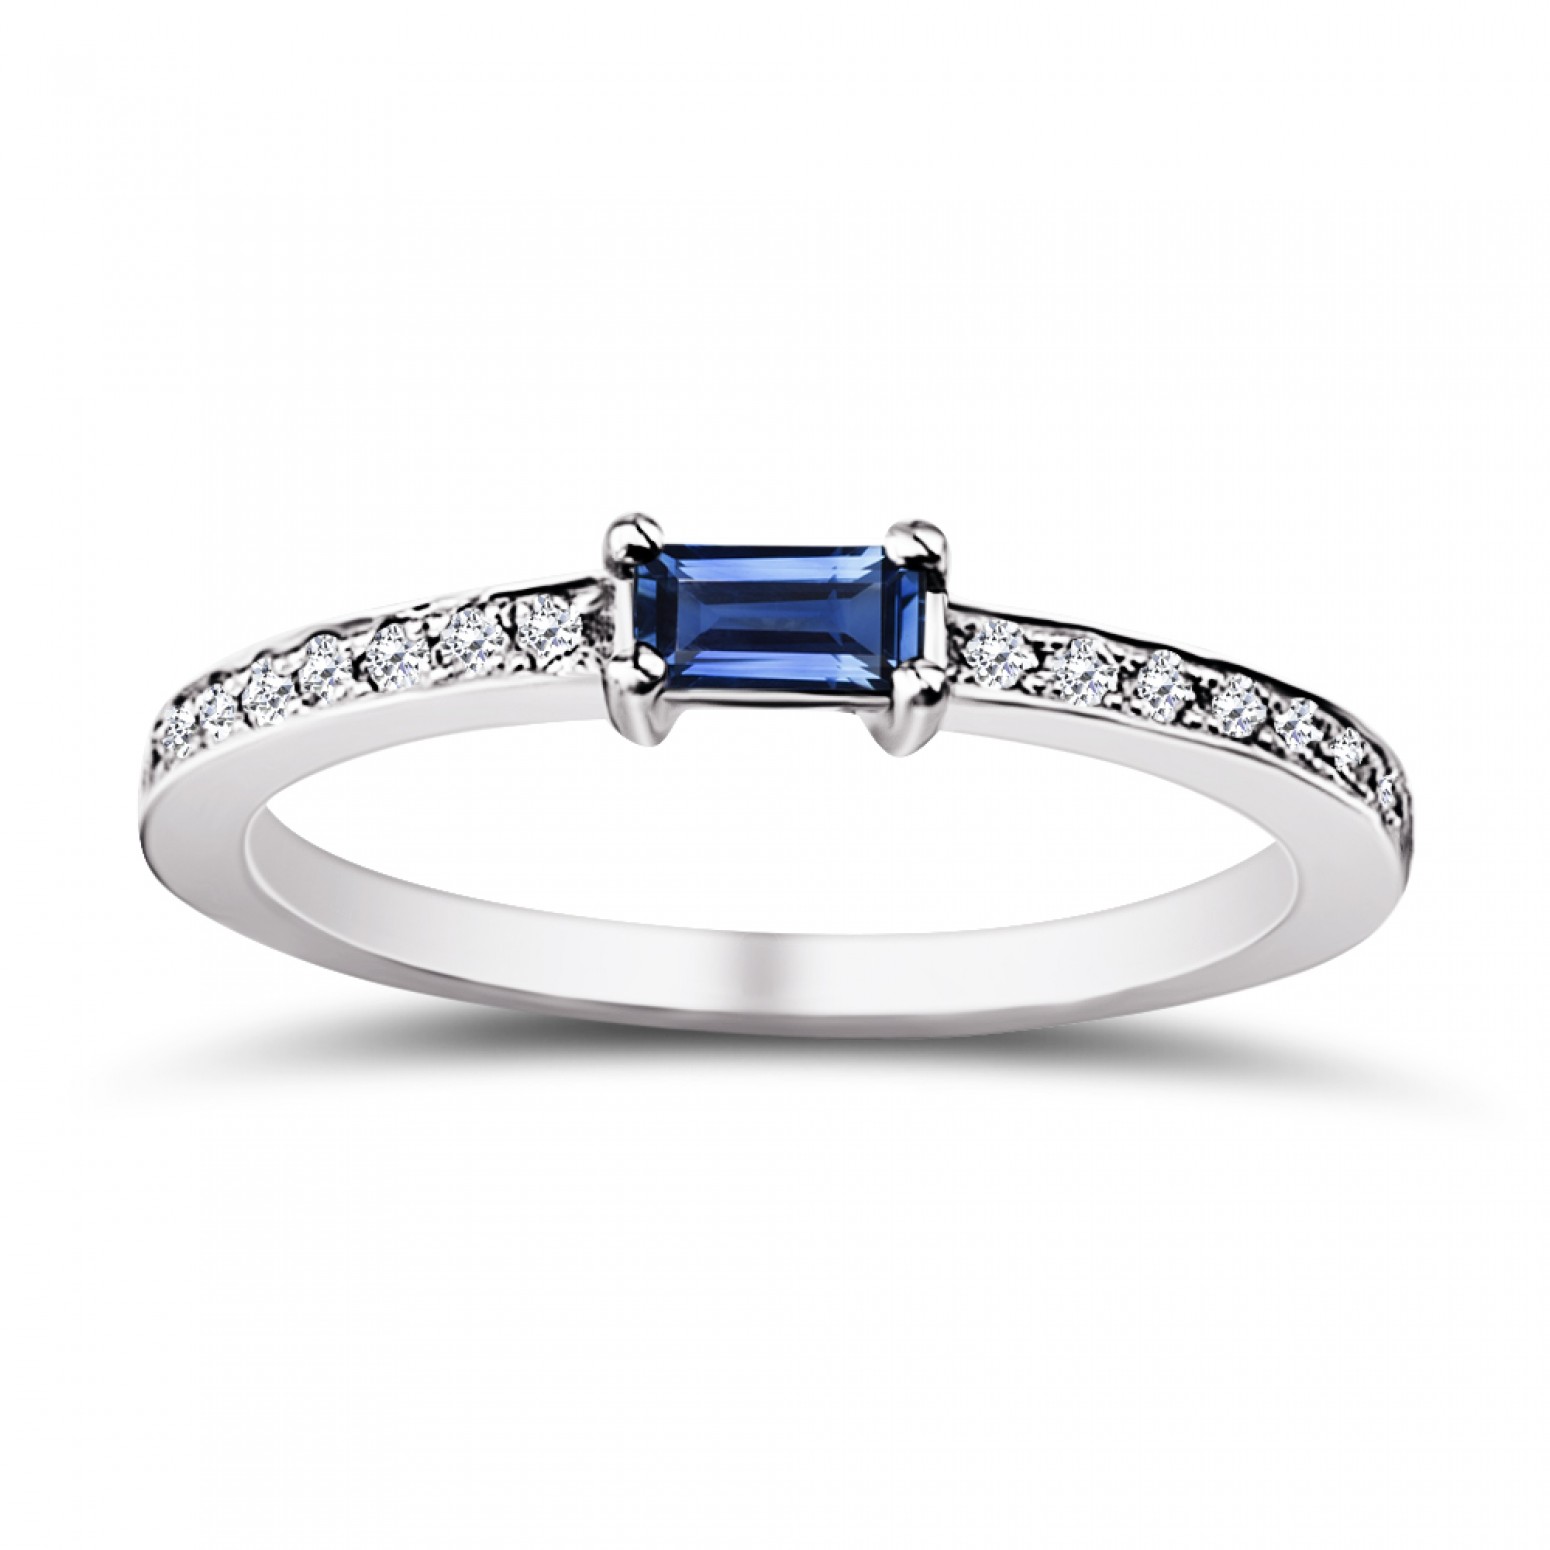 Solitaire ring 18K white gold with sapphire 0.24ct and diamonds  VS1, G da3688 ENGAGEMENT RINGS Κοσμηματα - chrilia.gr